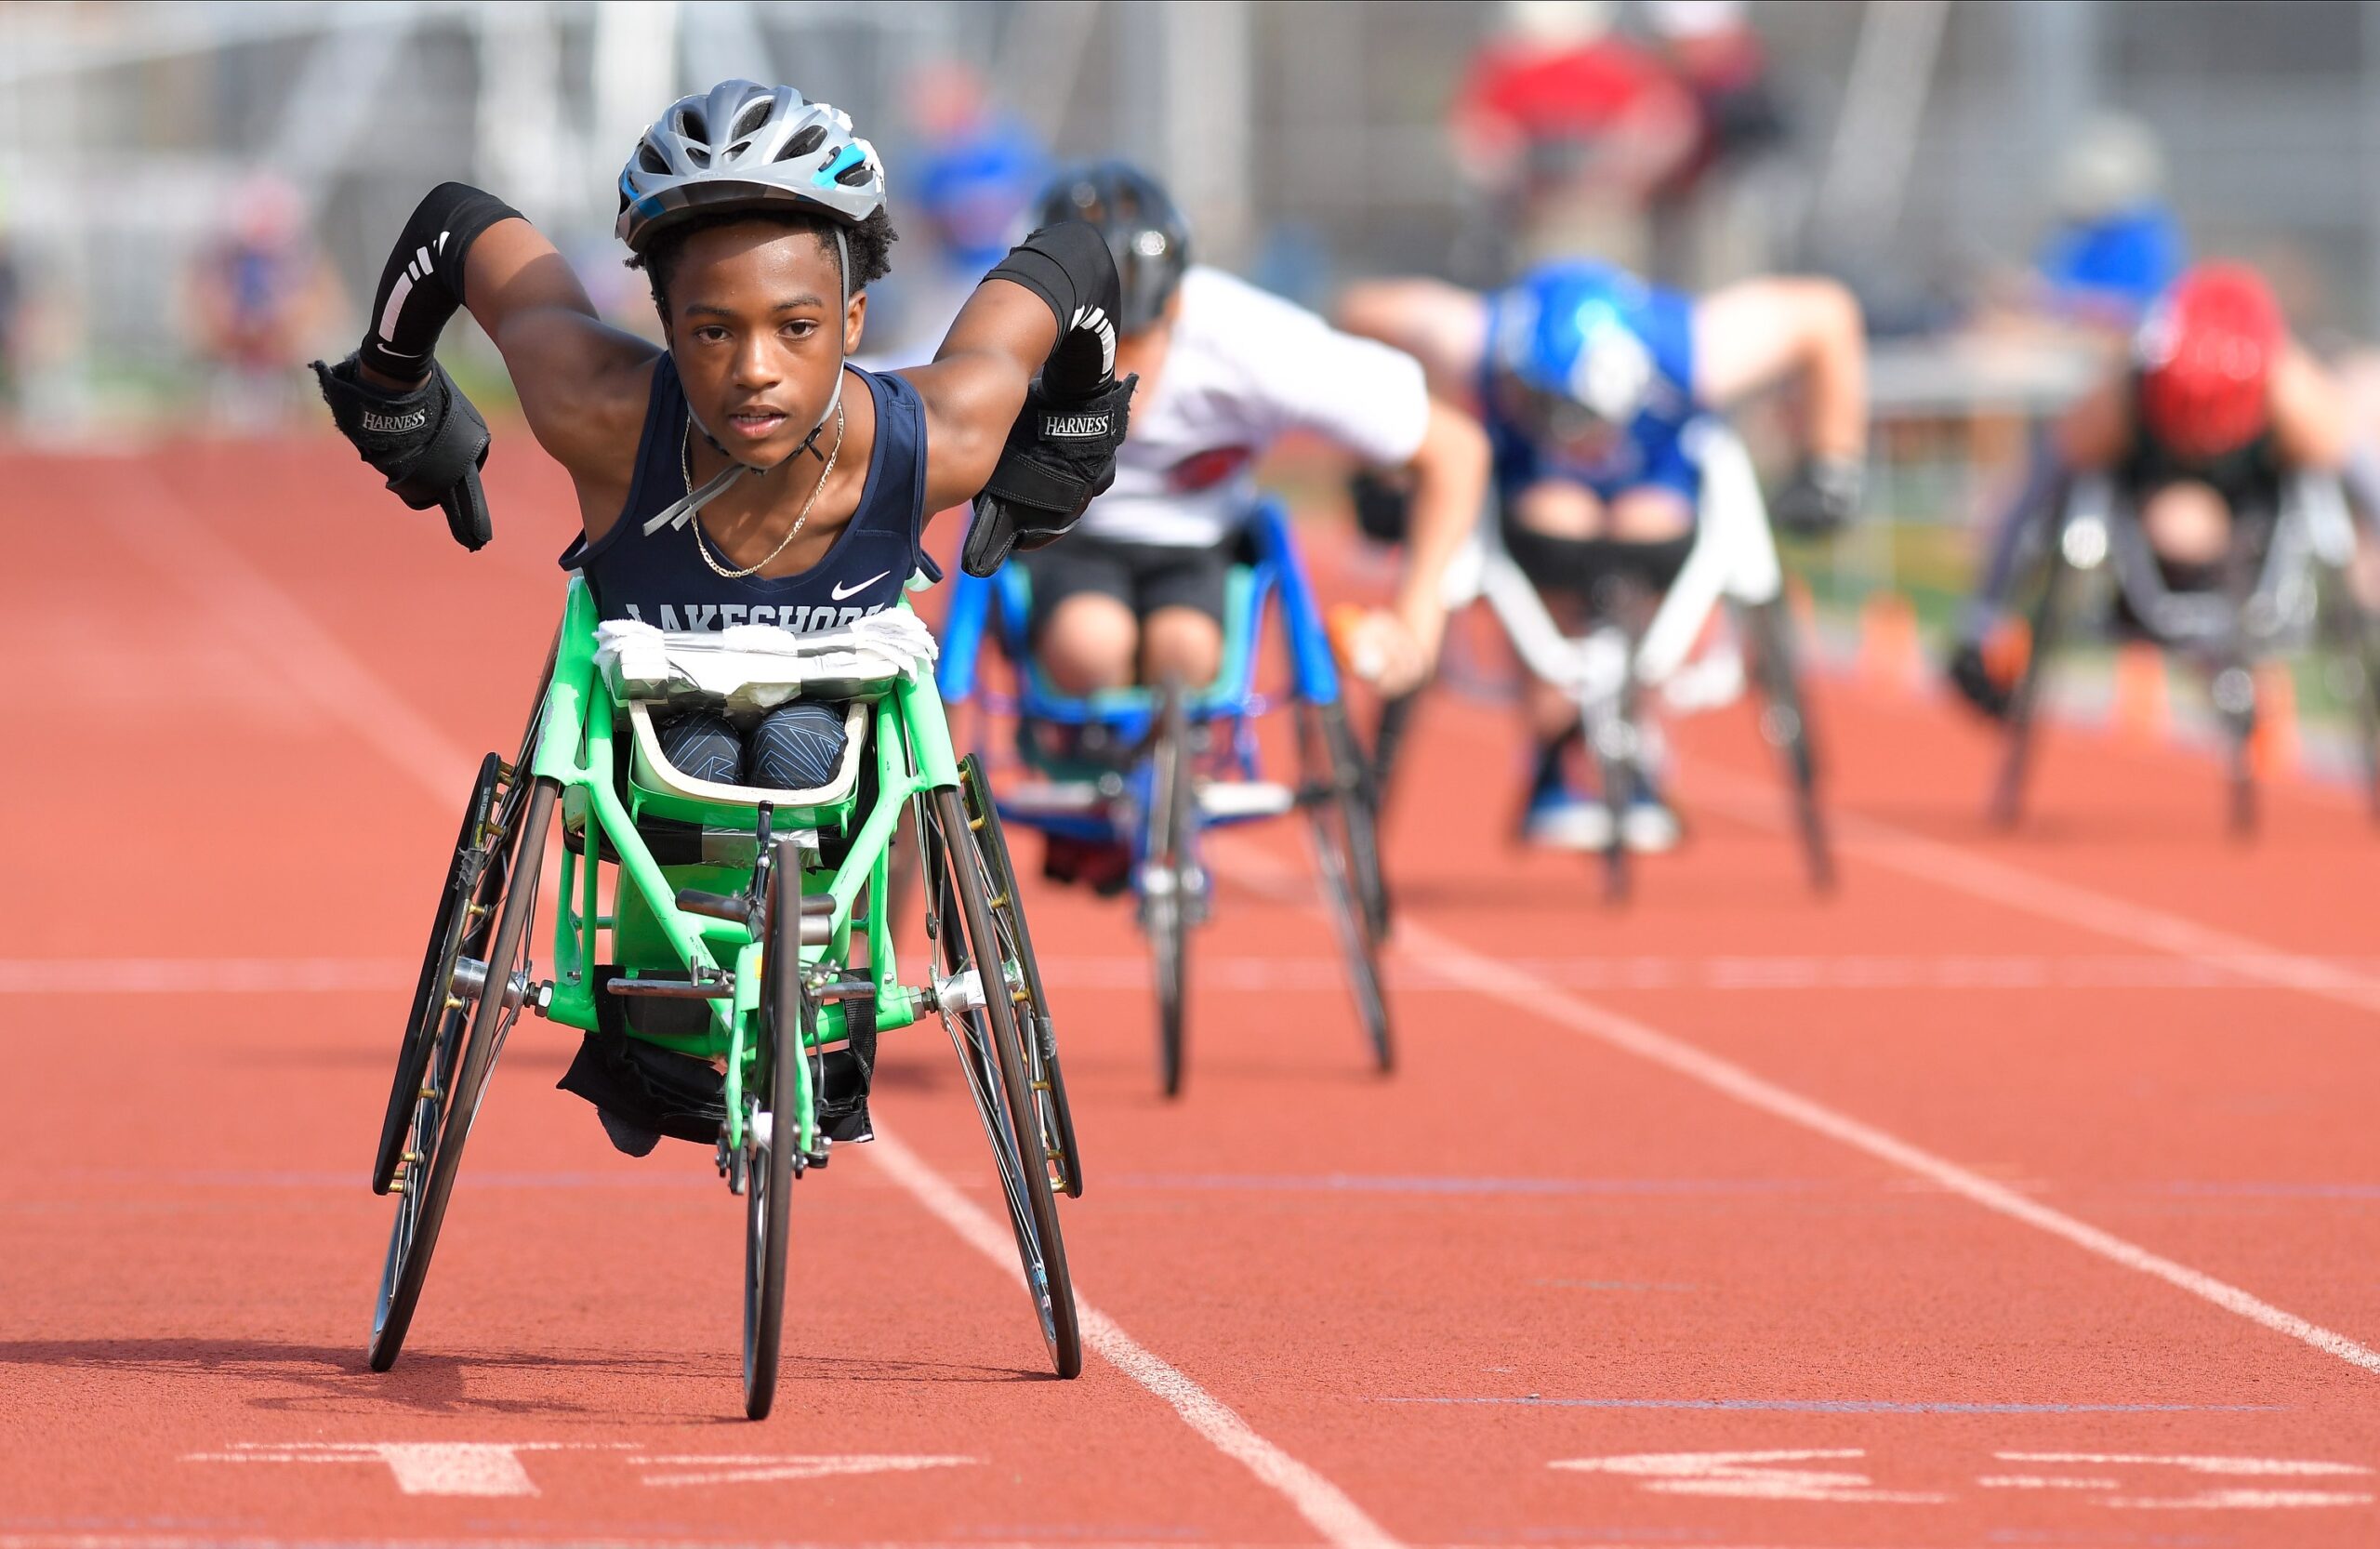 Athlete competing in racing wheelchair with other athletes behind them